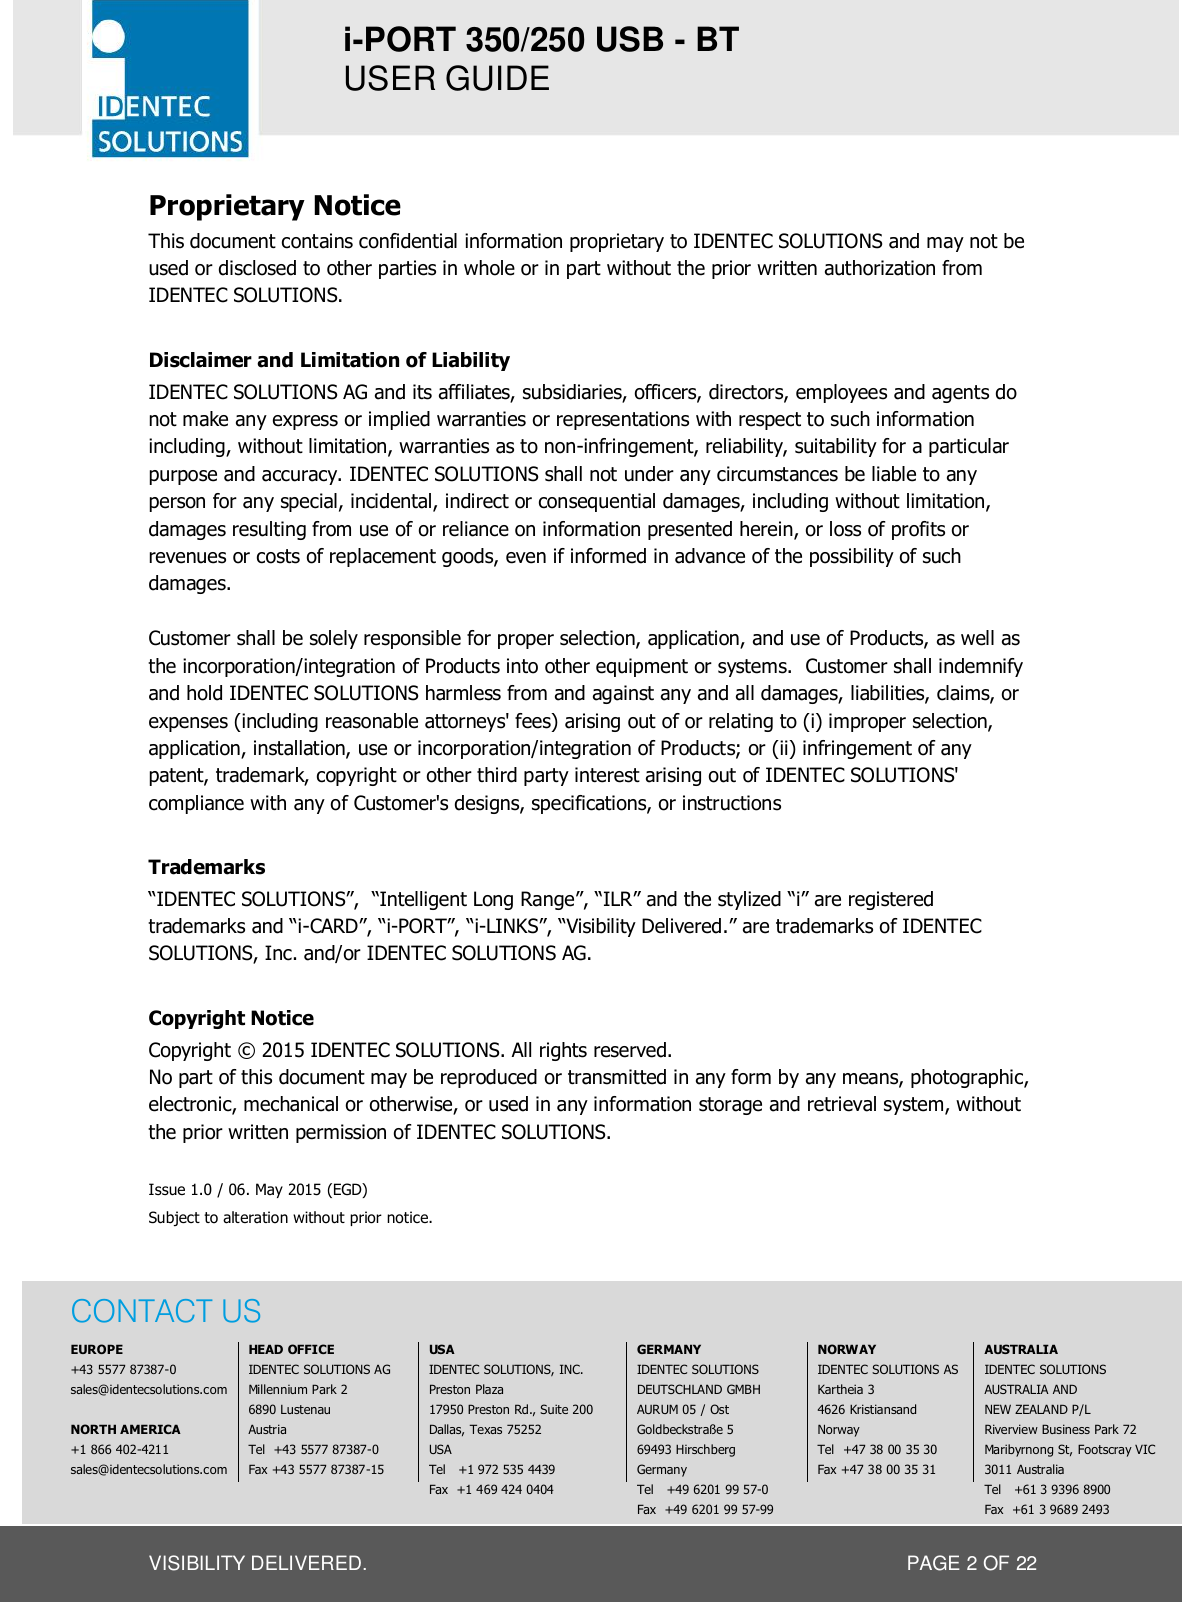 i-PORT 350/250 USB - BT  USER GUIDE  VISIBILITY DELIVERED.  PAGE 2 OF 22 Proprietary Notice This document contains confidential information proprietary to IDENTEC SOLUTIONS and may not be used or disclosed to other parties in whole or in part without the prior written authorization from IDENTEC SOLUTIONS.  Disclaimer and Limitation of Liability IDENTEC SOLUTIONS AG and its affiliates, subsidiaries, officers, directors, employees and agents do not make any express or implied warranties or representations with respect to such information including, without limitation, warranties as to non-infringement, reliability, suitability for a particular purpose and accuracy. IDENTEC SOLUTIONS shall not under any circumstances be liable to any person for any special, incidental, indirect or consequential damages, including without limitation, damages resulting from use of or reliance on information presented herein, or loss of profits or revenues or costs of replacement goods, even if informed in advance of the possibility of such damages.  Customer shall be solely responsible for proper selection, application, and use of Products, as well as the incorporation/integration of Products into other equipment or systems.  Customer shall indemnify and hold IDENTEC SOLUTIONS harmless from and against any and all damages, liabilities, claims, or expenses (including reasonable attorneys&apos; fees) arising out of or relating to (i) improper selection, application, installation, use or incorporation/integration of Products; or (ii) infringement of any patent, trademark, copyright or other third party interest arising out of IDENTEC SOLUTIONS&apos; compliance with any of Customer&apos;s designs, specifications, or instructions  Trademarks “IDENTEC SOLUTIONS”,  “Intelligent Long Range”, “ILR” and the stylized “i” are registered trademarks and “i-CARD”, “i-PORT”, “i-LINKS”, “Visibility Delivered.” are trademarks of IDENTEC SOLUTIONS, Inc. and/or IDENTEC SOLUTIONS AG.  Copyright Notice Copyright © 2015 IDENTEC SOLUTIONS. All rights reserved. No part of this document may be reproduced or transmitted in any form by any means, photographic, electronic, mechanical or otherwise, or used in any information storage and retrieval system, without the prior written permission of IDENTEC SOLUTIONS.  Issue 1.0 / 06. May 2015 (EGD) Subject to alteration without prior notice.    CONTACT US               EUROPE   HEAD OFFICE  USA  GERMANY  NORWAY  AUSTRALIA   +43 5577 87387-0  IDENTEC SOLUTIONS AG  IDENTEC SOLUTIONS, INC.  IDENTEC SOLUTIONS   IDENTEC SOLUTIONS AS  IDENTEC SOLUTIONS     sales@identecsolutions.com  Millennium Park 2  Preston Plaza  DEUTSCHLAND GMBH  Kartheia 3  AUSTRALIA AND       6890 Lustenau  17950 Preston Rd., Suite 200   AURUM 05 / Ost   4626 Kristiansand  NEW ZEALAND P/L   NORTH AMERICA  Austria  Dallas, Texas 75252  Goldbeckstraße 5  Norway  Riverview Business Park 72    +1 866 402-4211  Tel  +43 5577 87387-0  USA  69493 Hirschberg  Tel  +47 38 00 35 30  Maribyrnong St, Footscray VIC   sales@identecsolutions.com  Fax +43 5577 87387-15  Tel   +1 972 535 4439  Germany  Fax +47 38 00 35 31  3011 Australia          Fax  +1 469 424 0404  Tel   +49 6201 99 57-0     Tel   +61 3 9396 8900            Fax  +49 6201 99 57-99     Fax  +61 3 9689 2493  